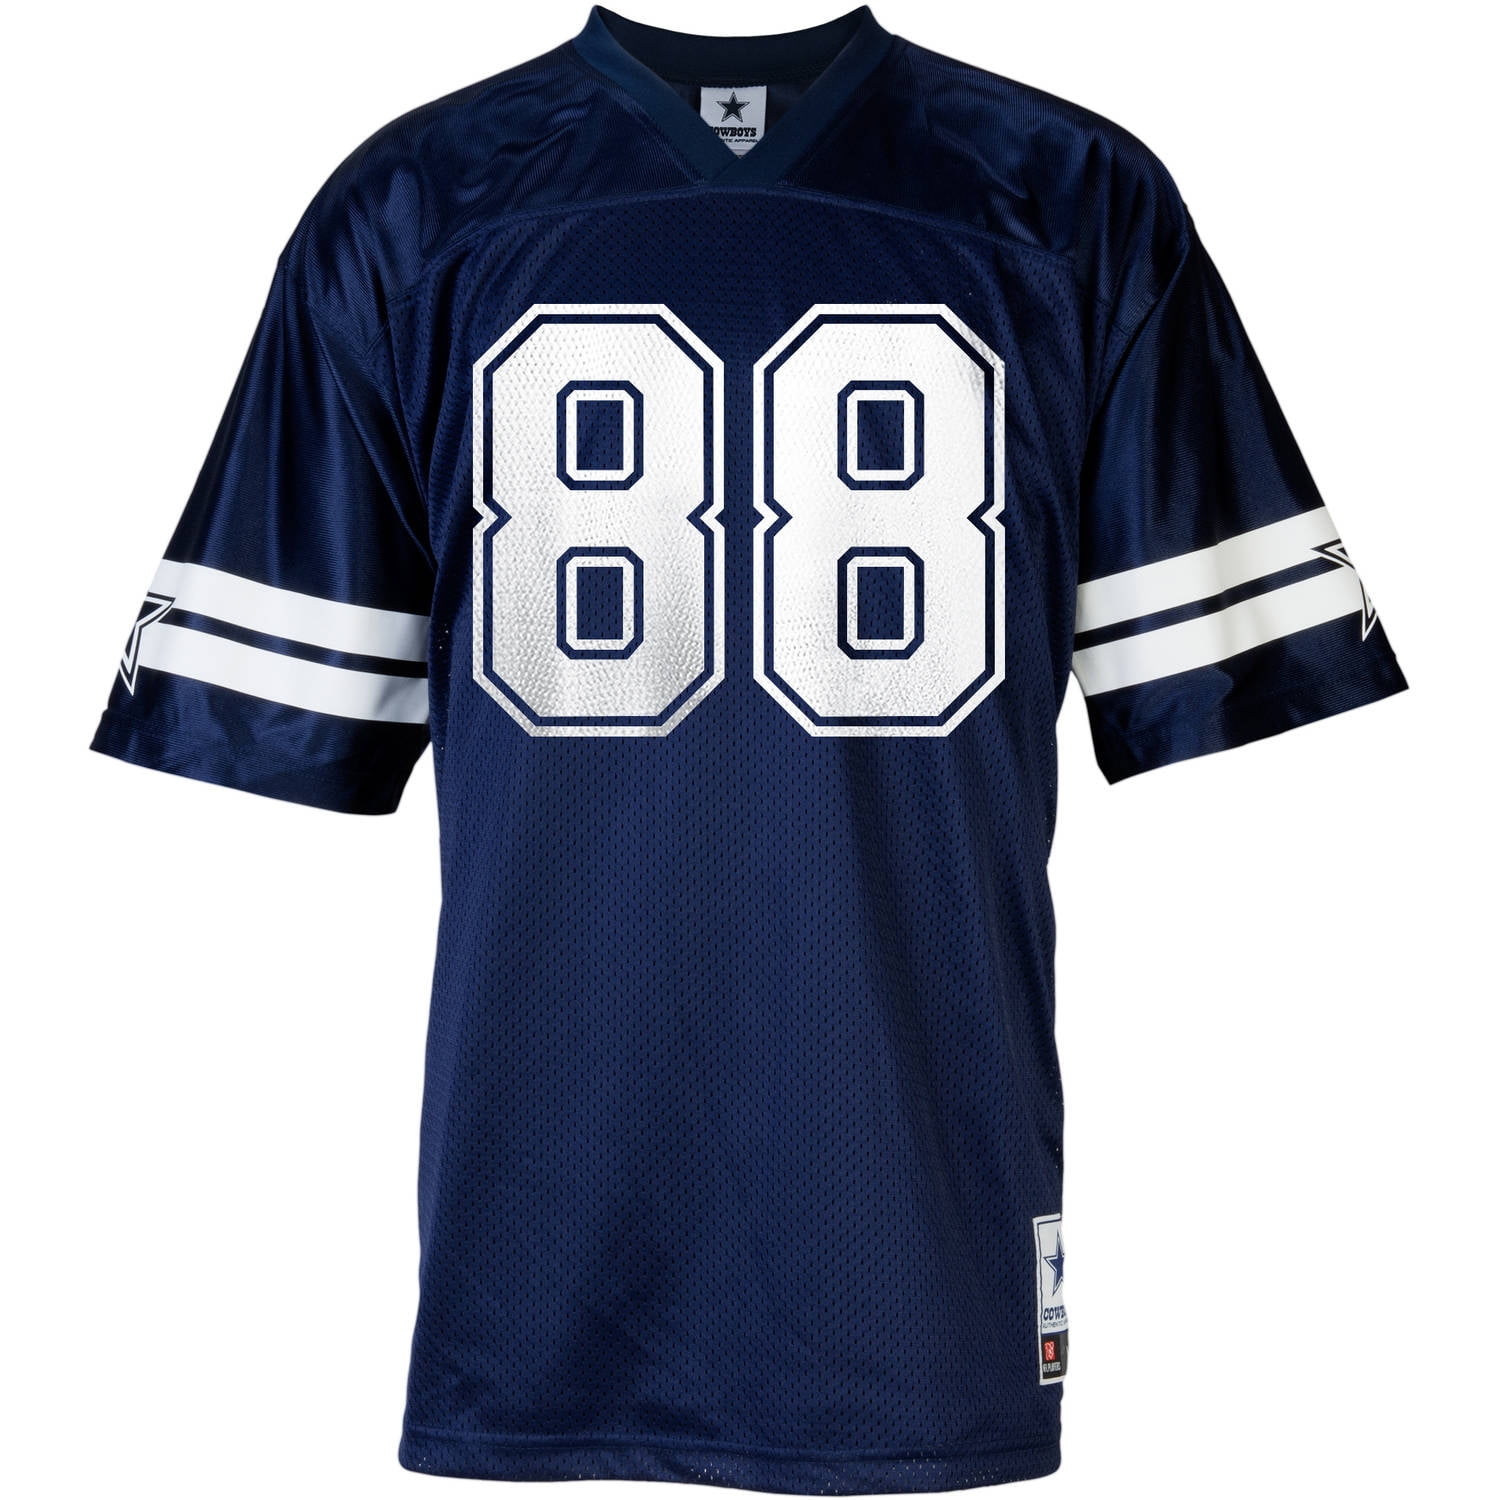 NLF Players Dallas Cowboys #88 Dez Bryant Jersey Youth Large Black/Blue